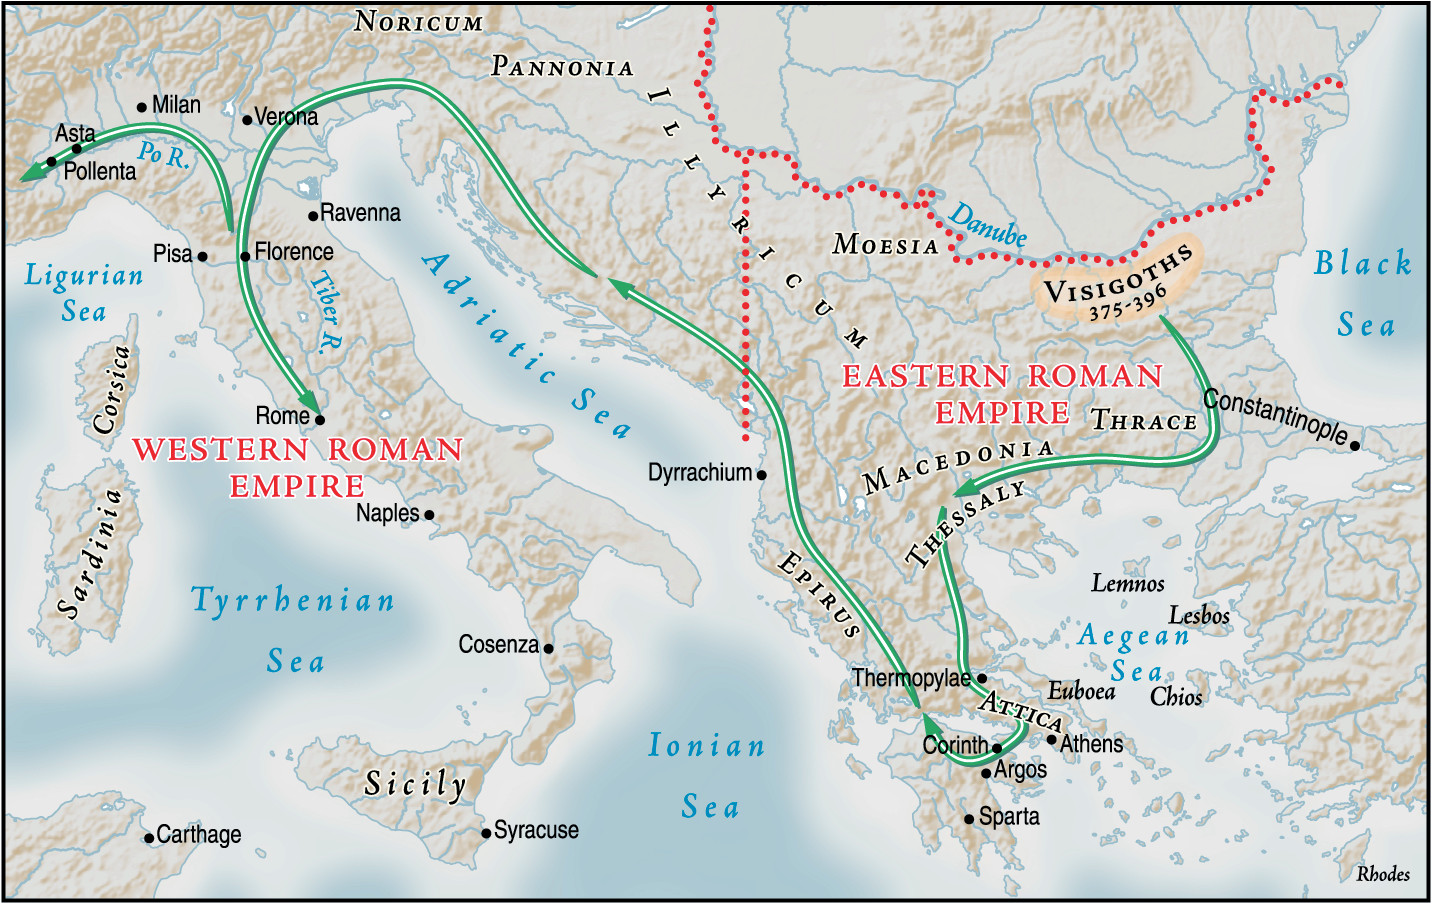 Following the death of Emperor Theodosius, angry Goths swept southward across the Danube River through Macedonia and Thrace, then moved east to Constantinople.